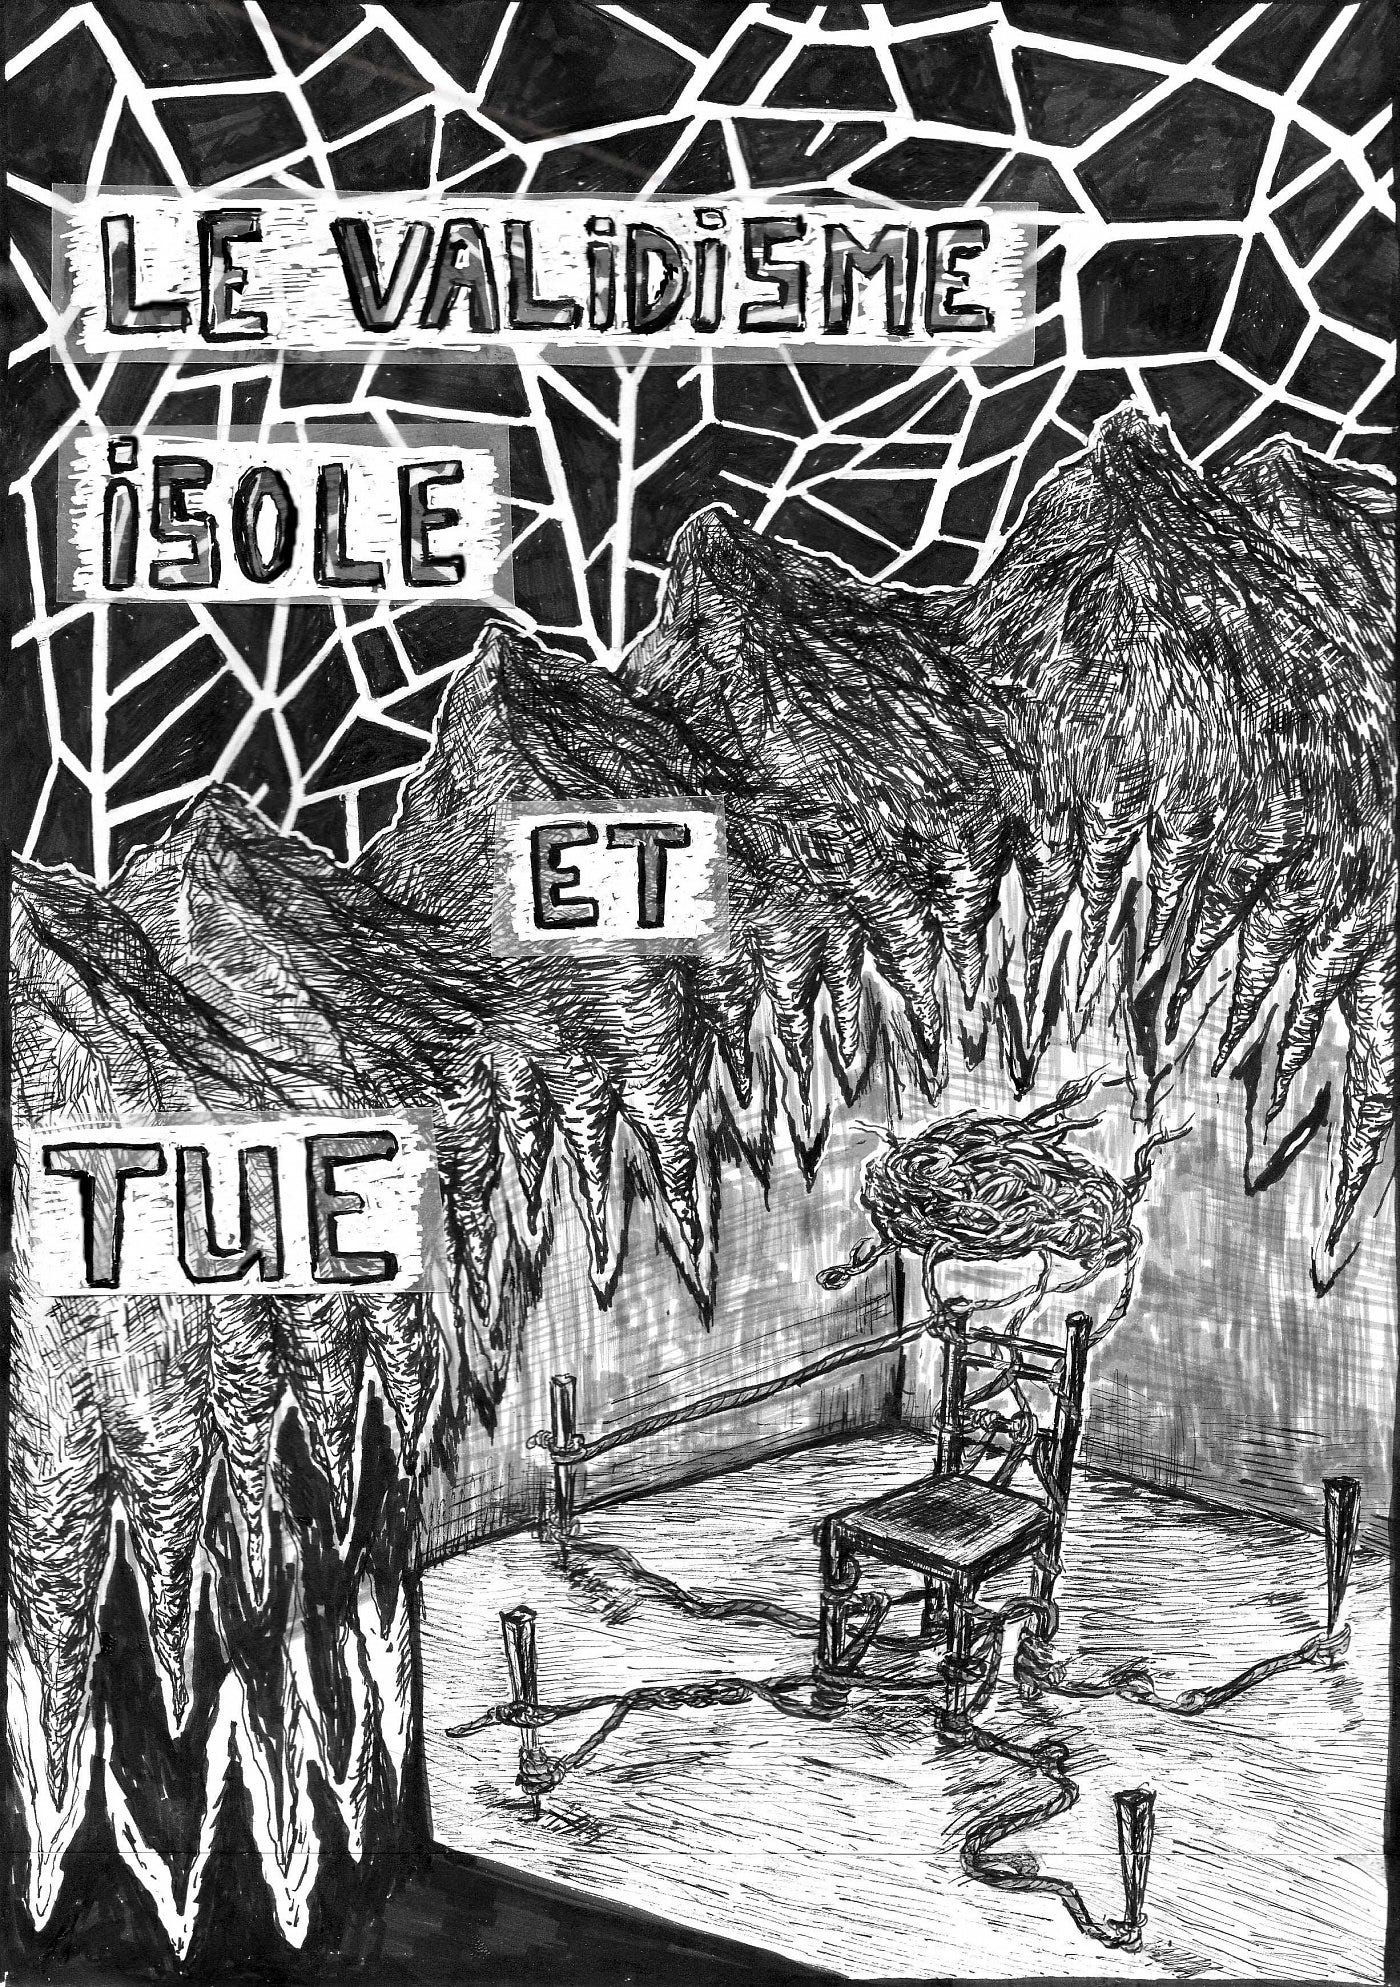 A drawing with a chair in chains in front of some hills, the text reads, le validism isole et tue, see caption for engl.